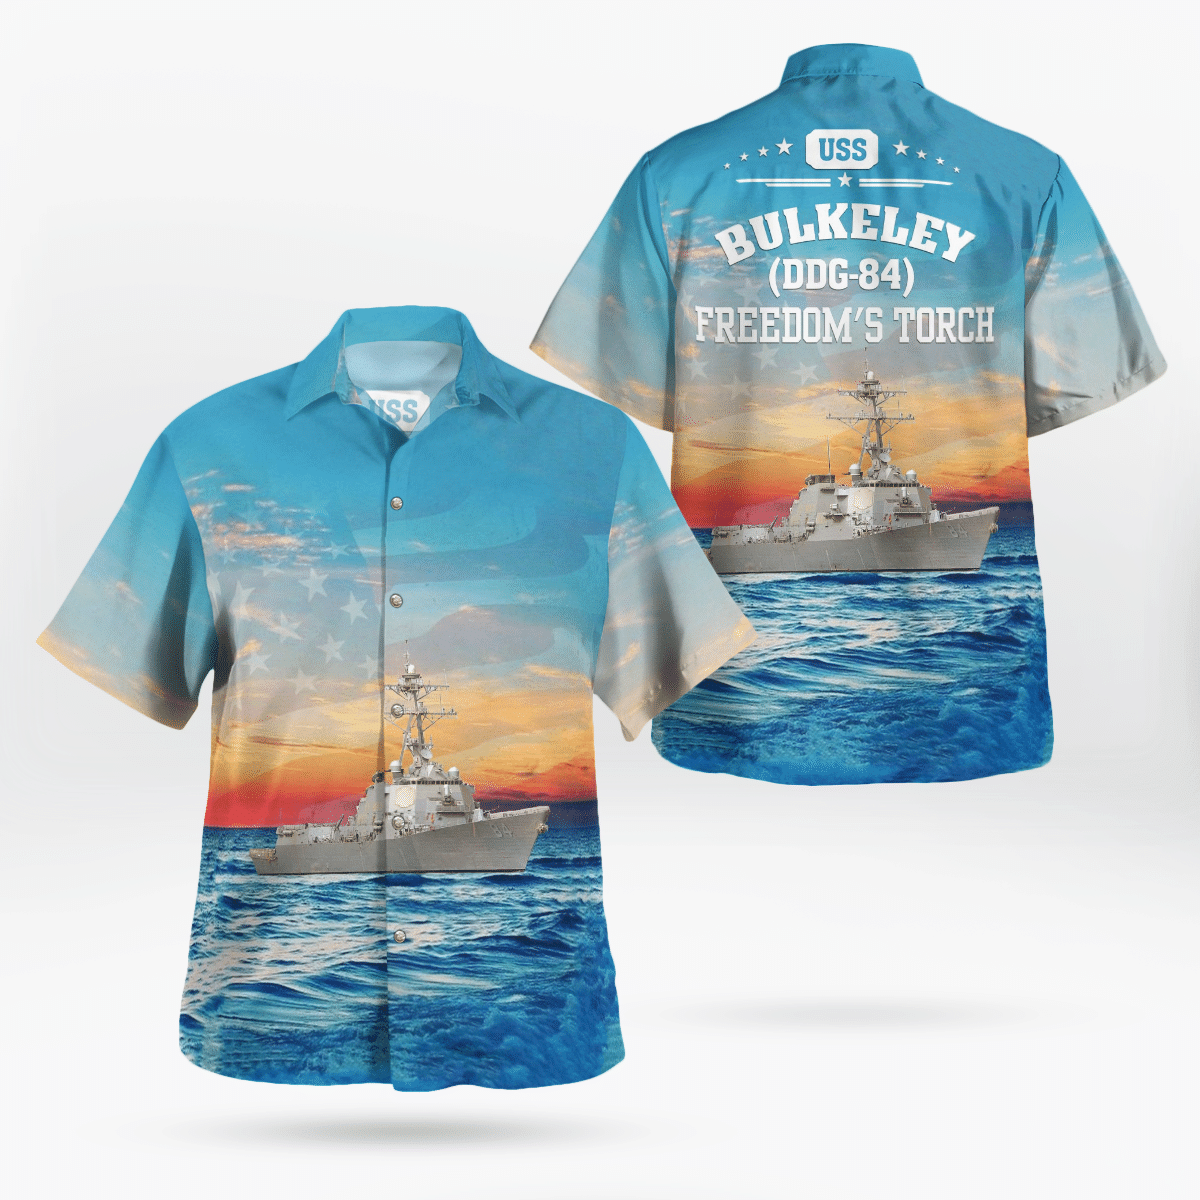 If you are in need of a new summertime look, pick up this Hawaiian shirt 16